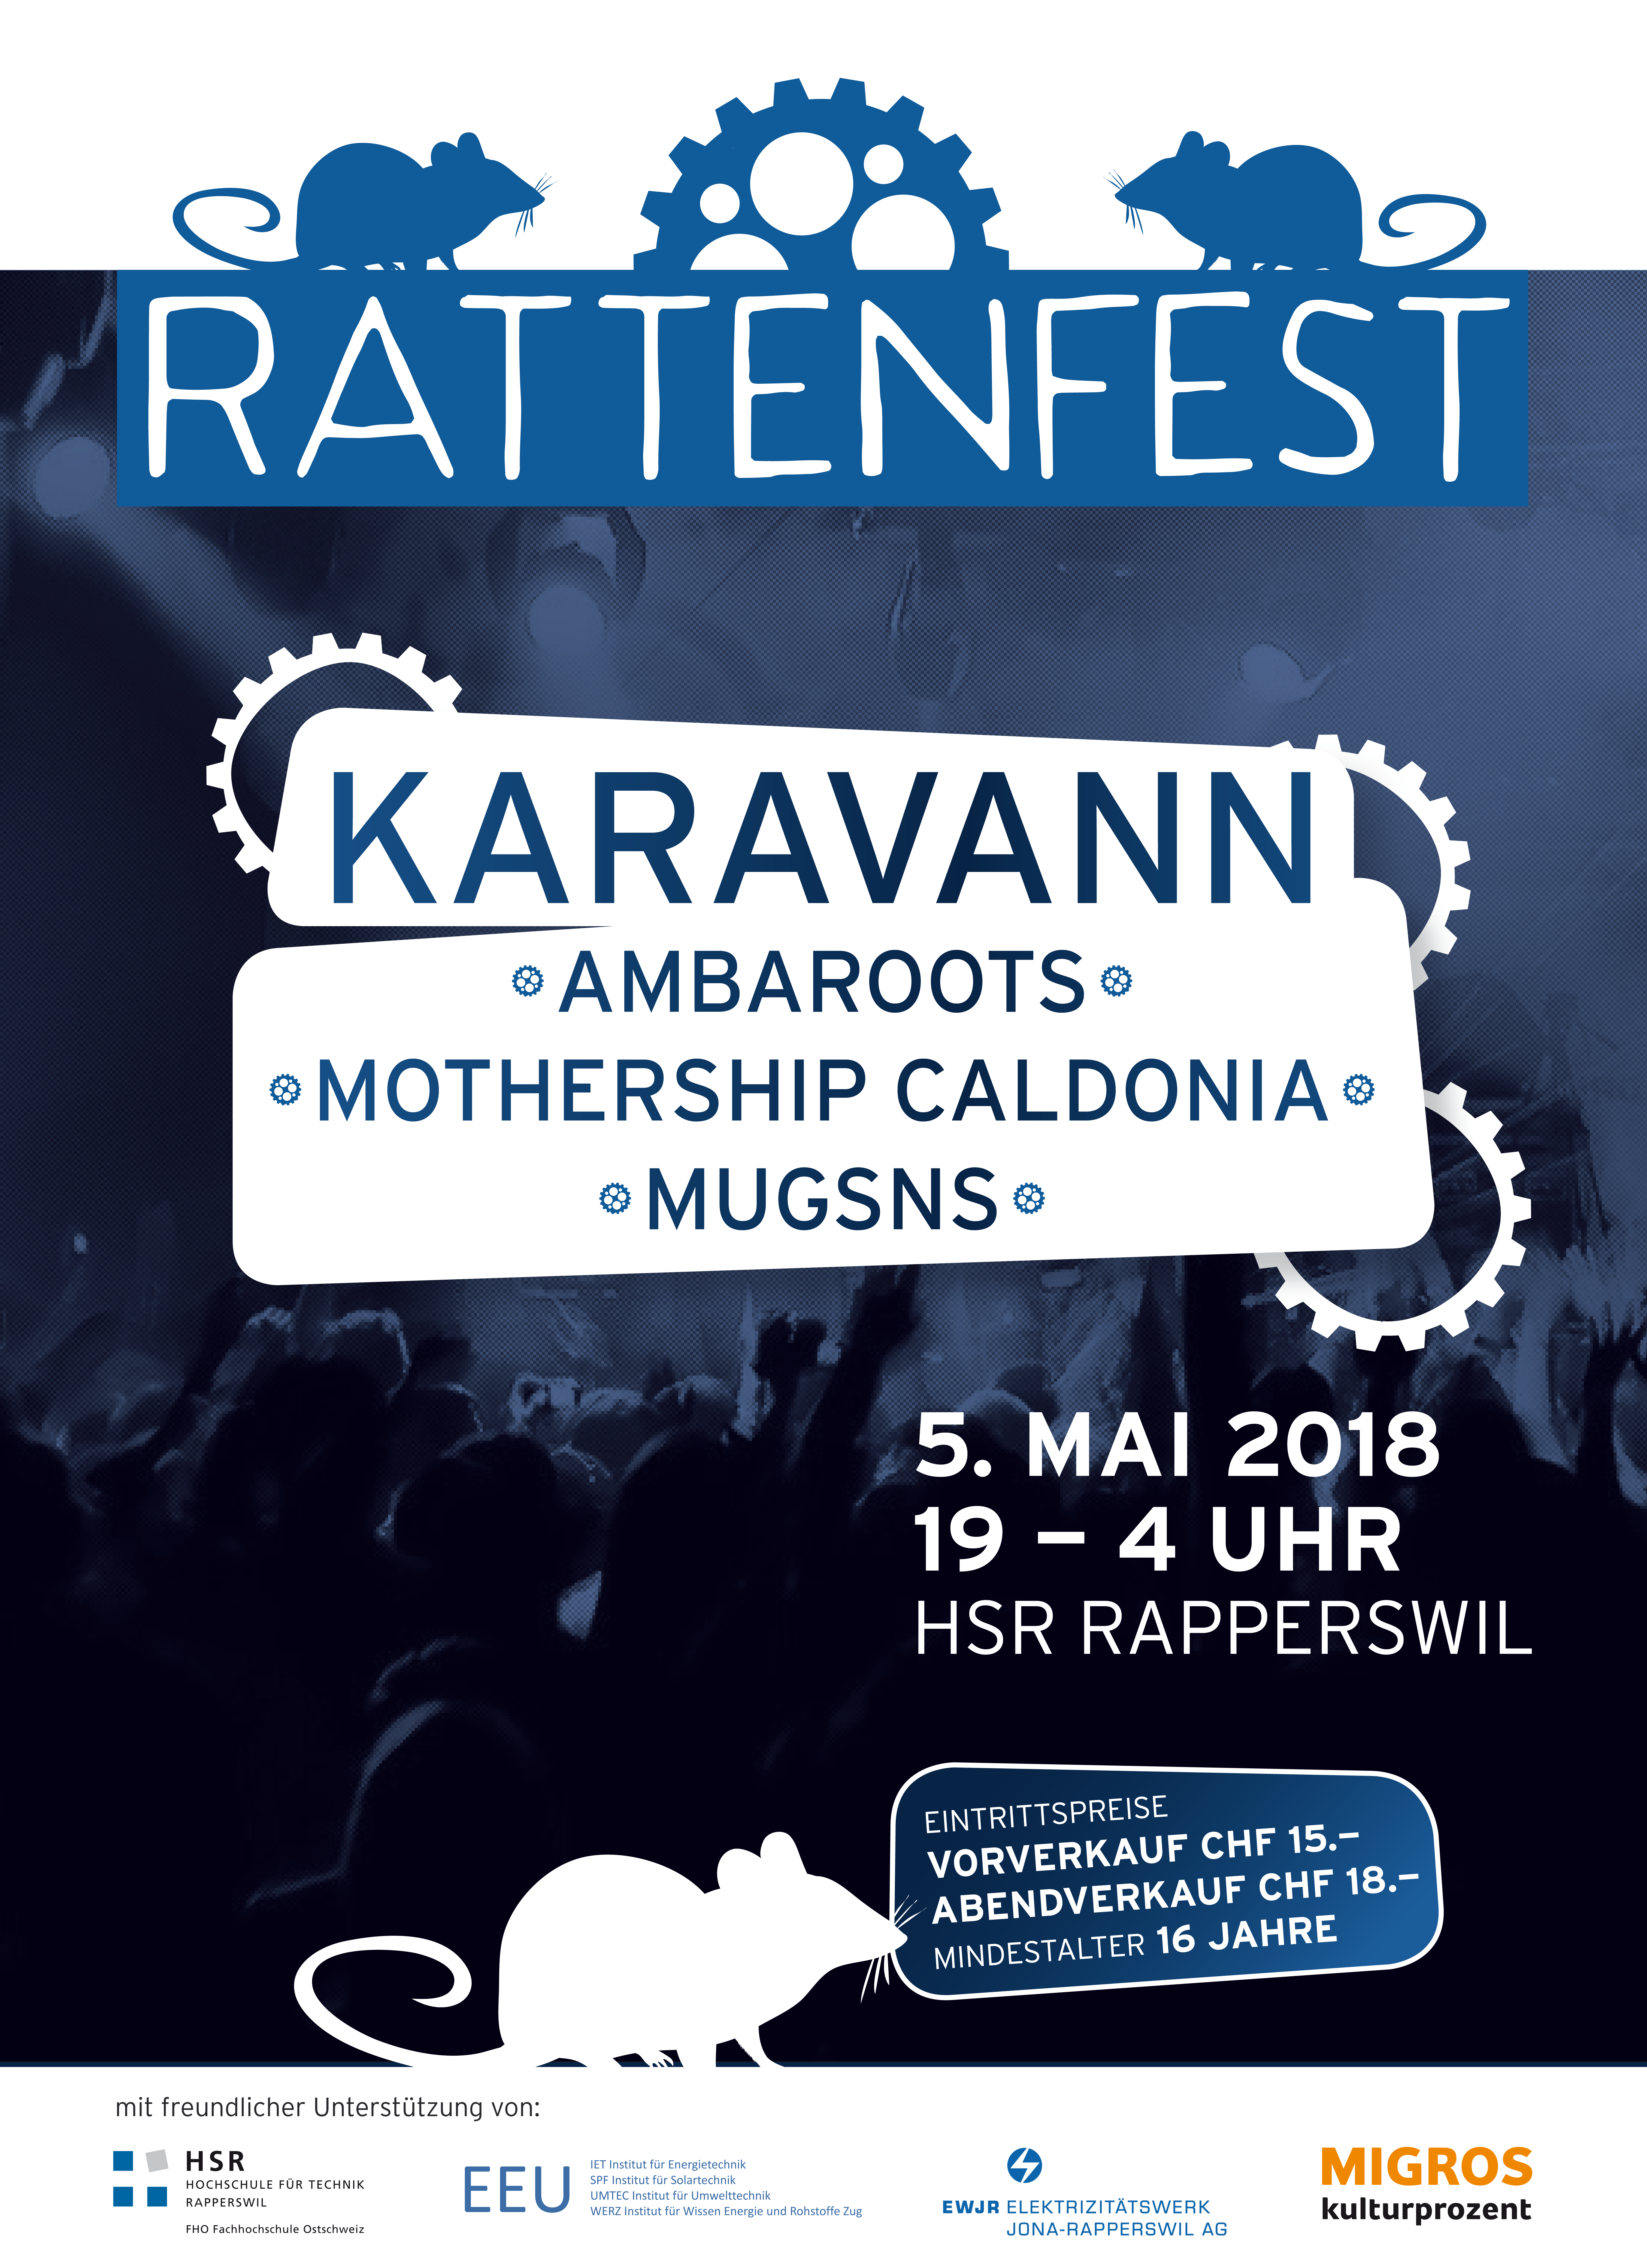 Rattenfest 2018